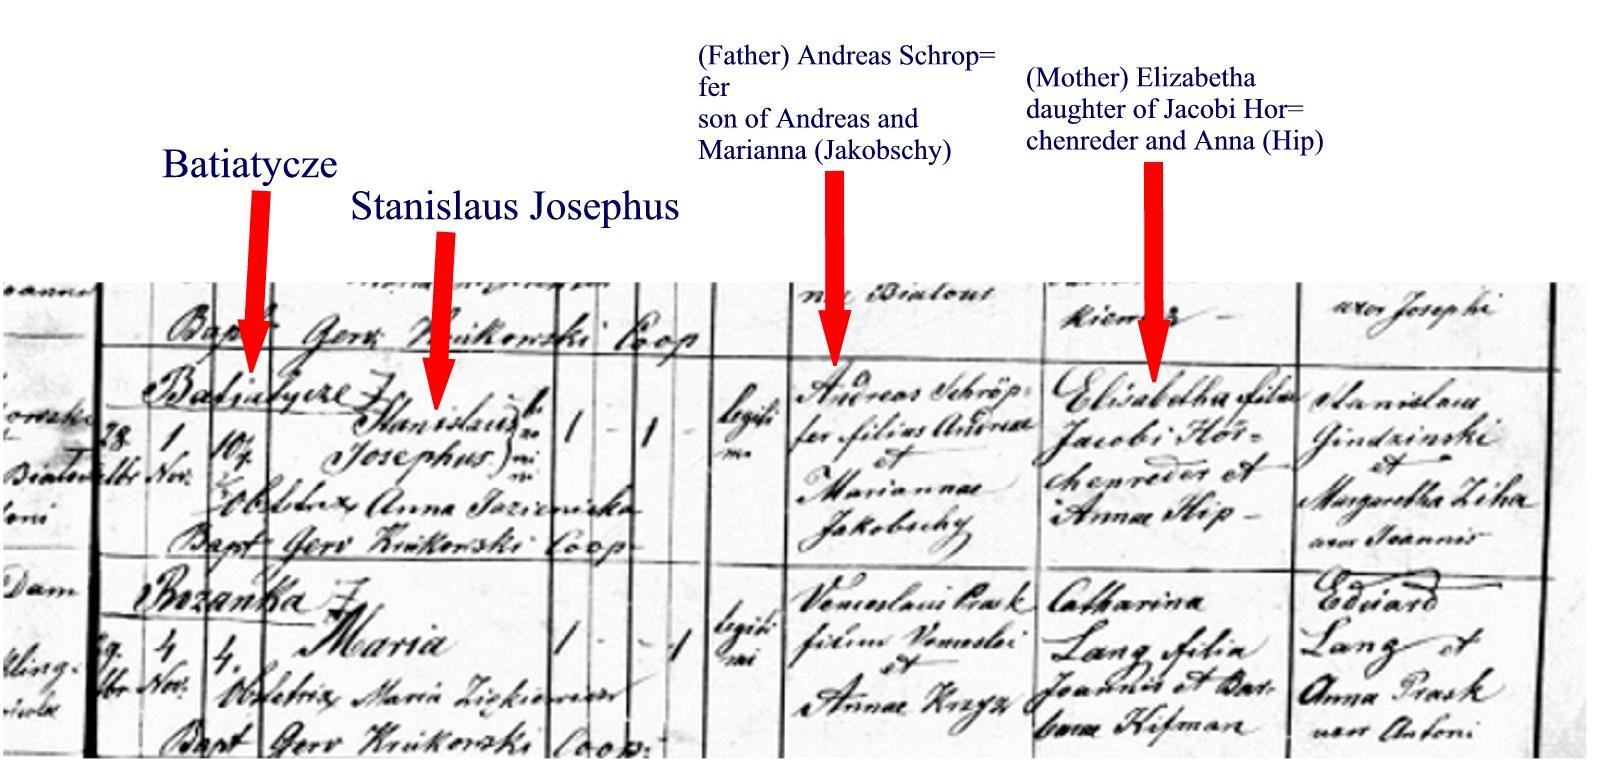 andreas and stanlislaus schroepfer birth record